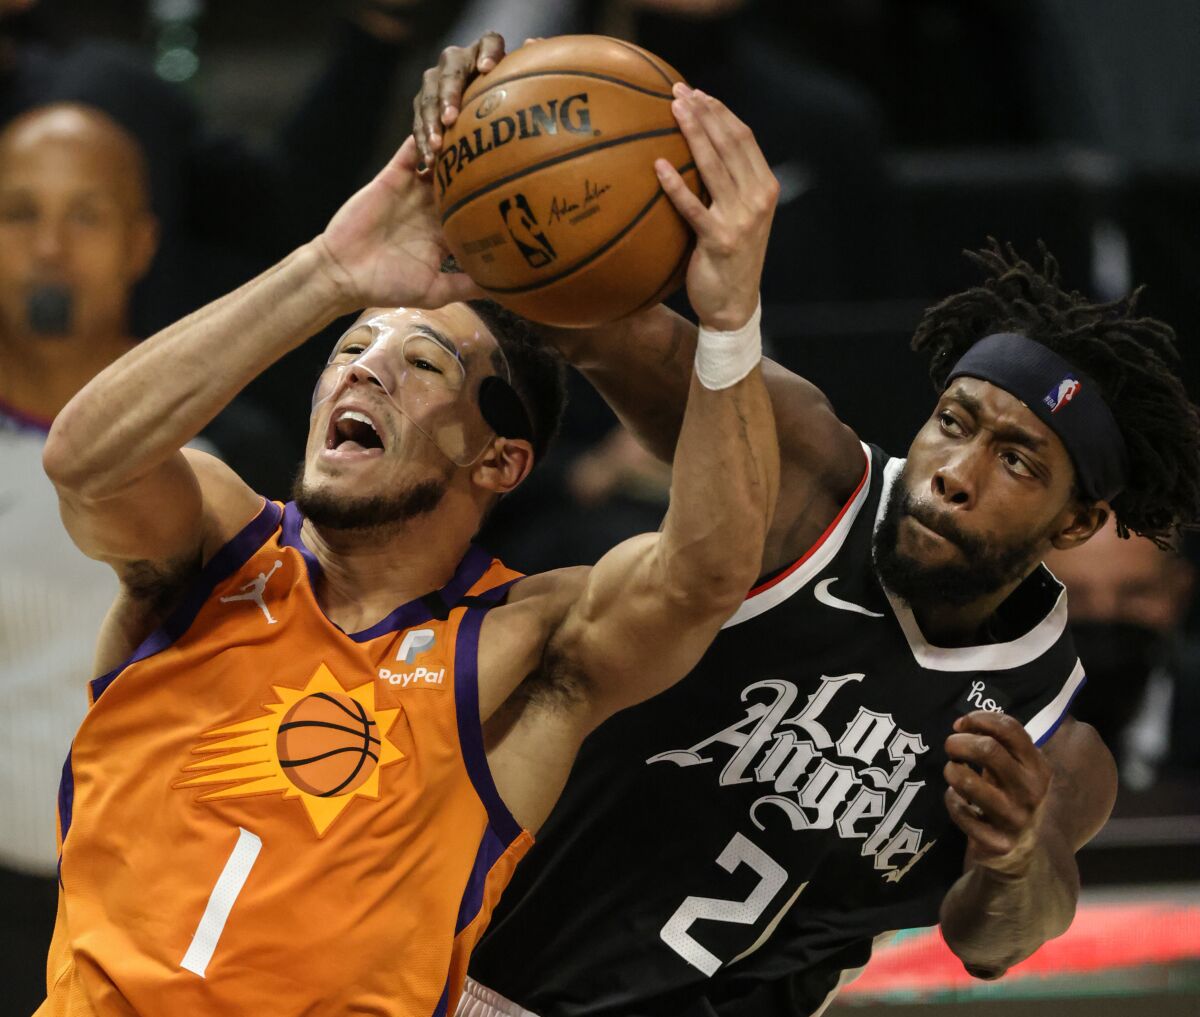 Clippers guard Patrick Beverley fouls Suns guard Devin Booker on a shot attempt.